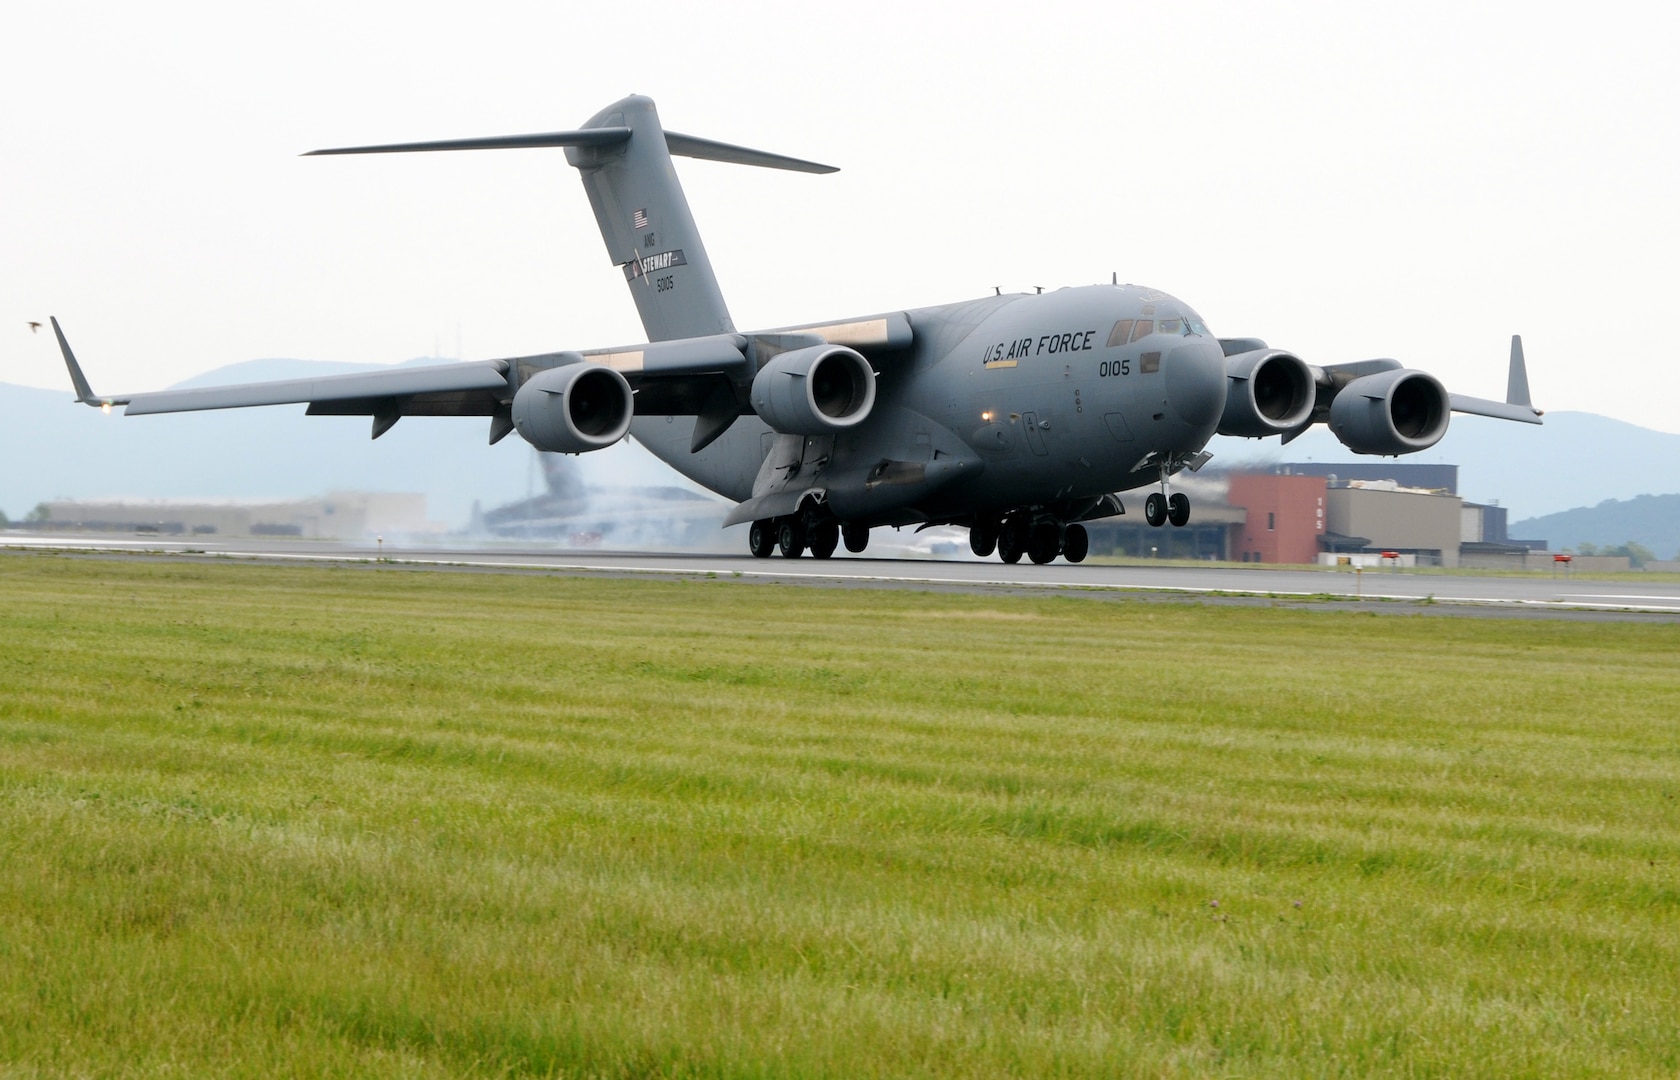 The first C-17 Globemaster III assigned to the 105th Airlift Wing touches down on Stewart International Airport's runway July 18, 2011. It is one of eight C-17s the 105th Wing is scheduled to receive as the unit phases out its C-5A Galaxy aircraft.